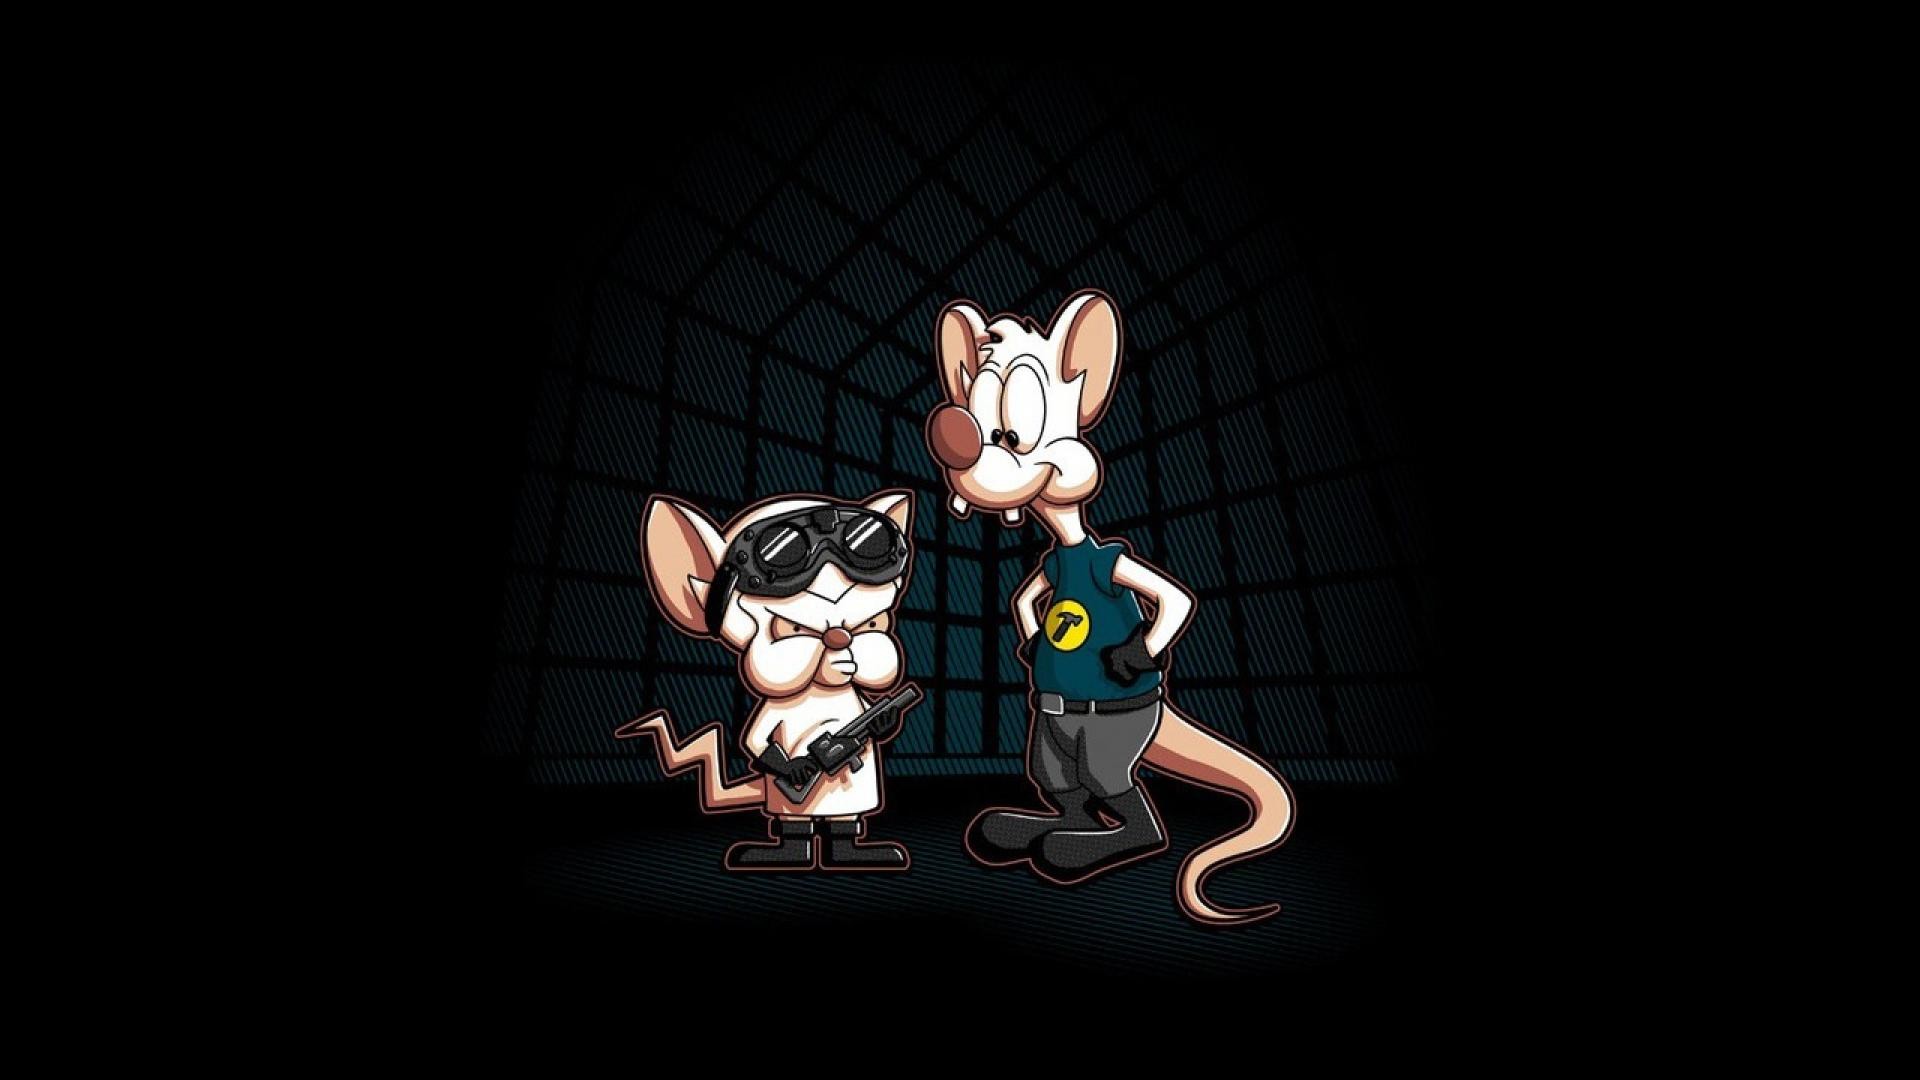 1920x1080 Dr horrible pinky and the brain wallpaper | (57137)